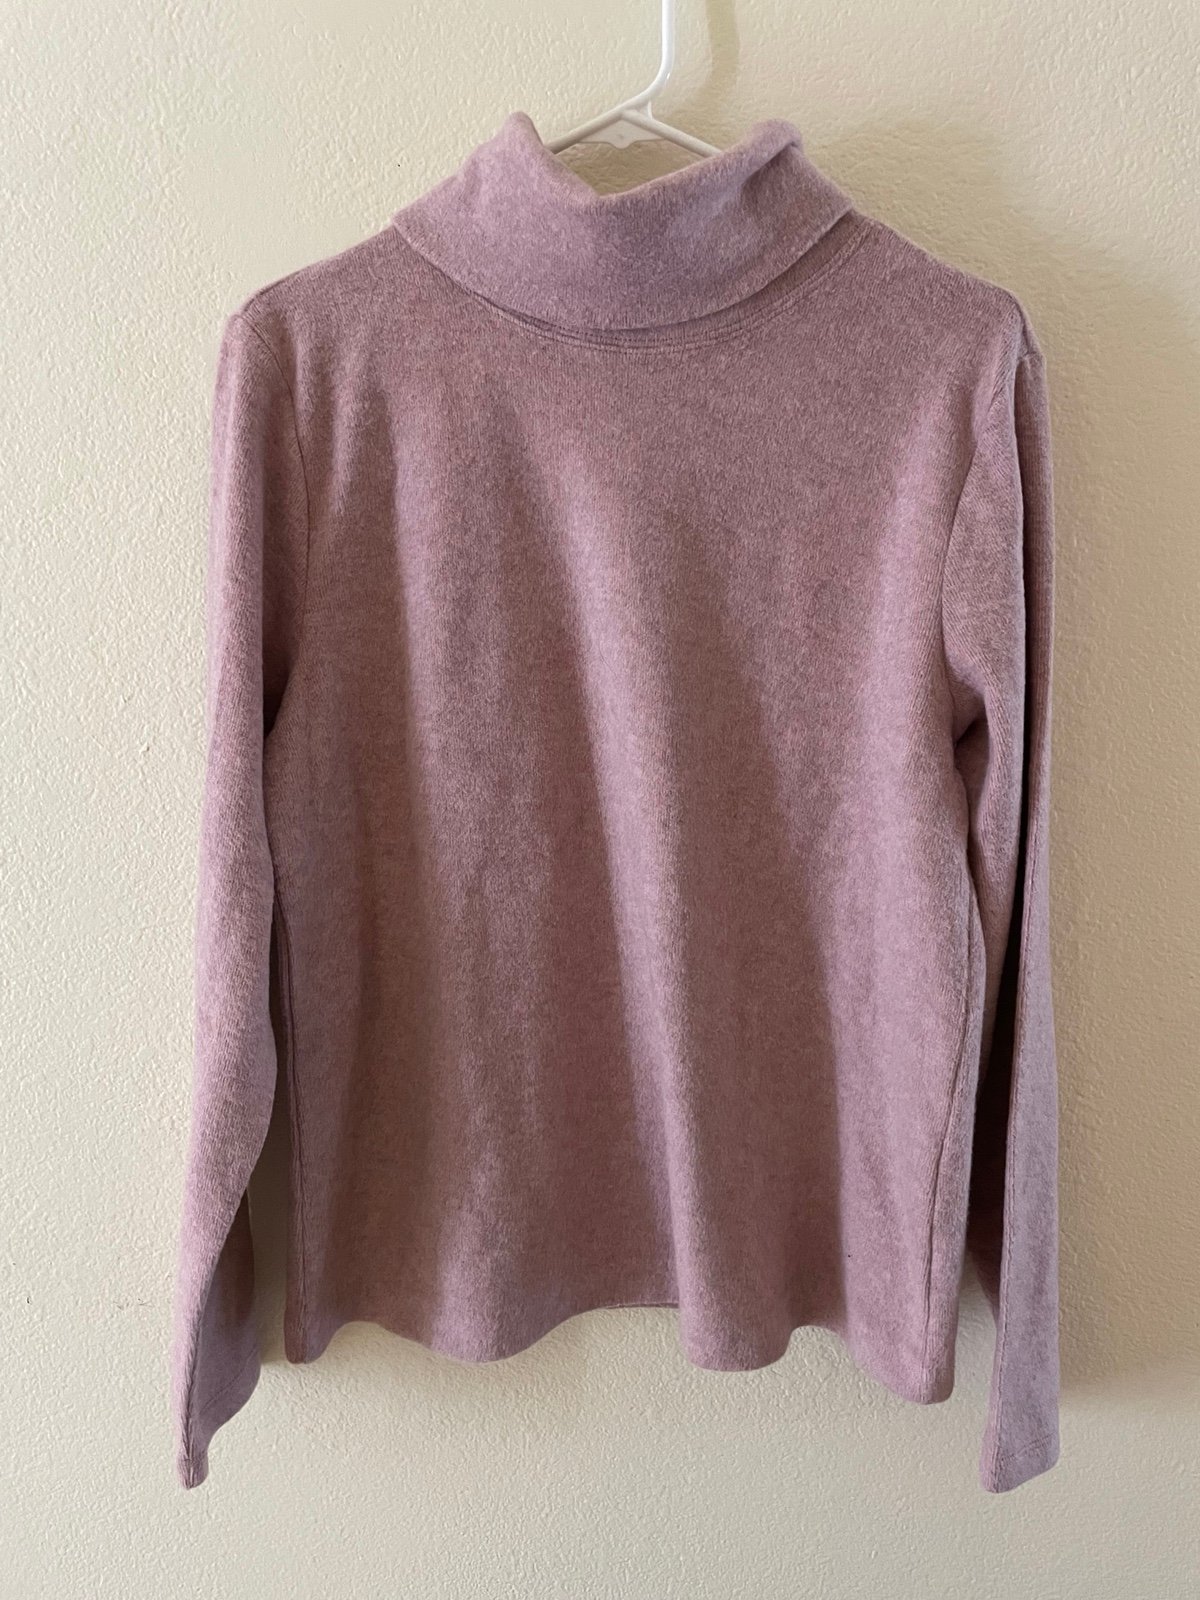 cheapest place to buy  The group babaton cowl neck lewis sweater Turtleneck NuHqH3Ne2 Outlet Store